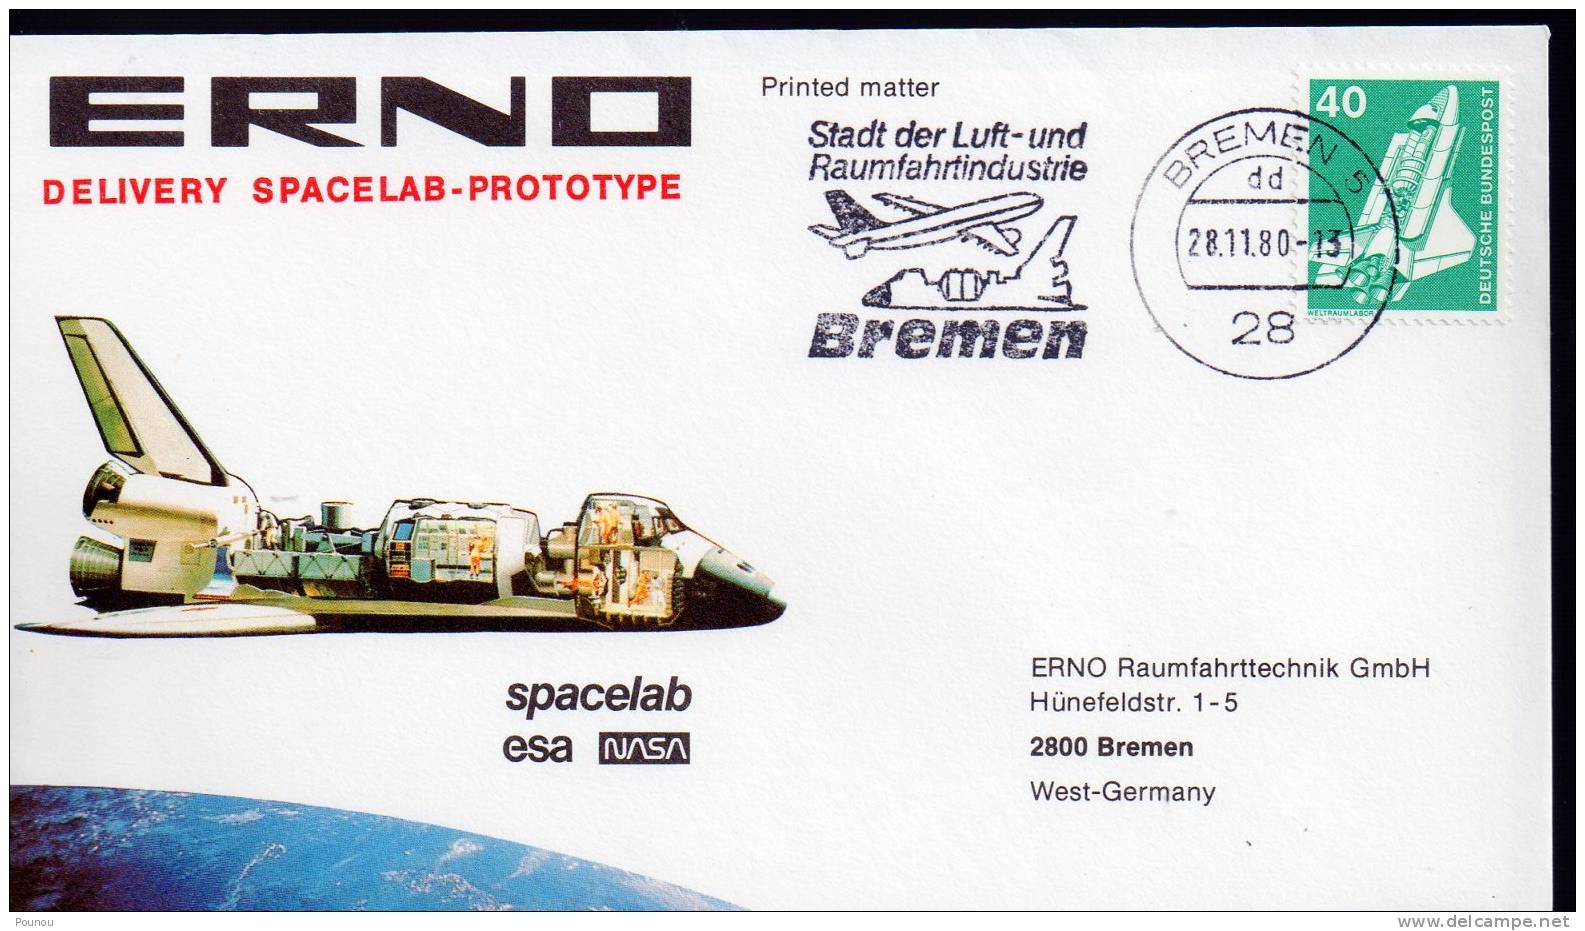 &#9733;GERMANY - ERNO - DELIVERY SPACELAB PROTOTYPE (5092) - Europe